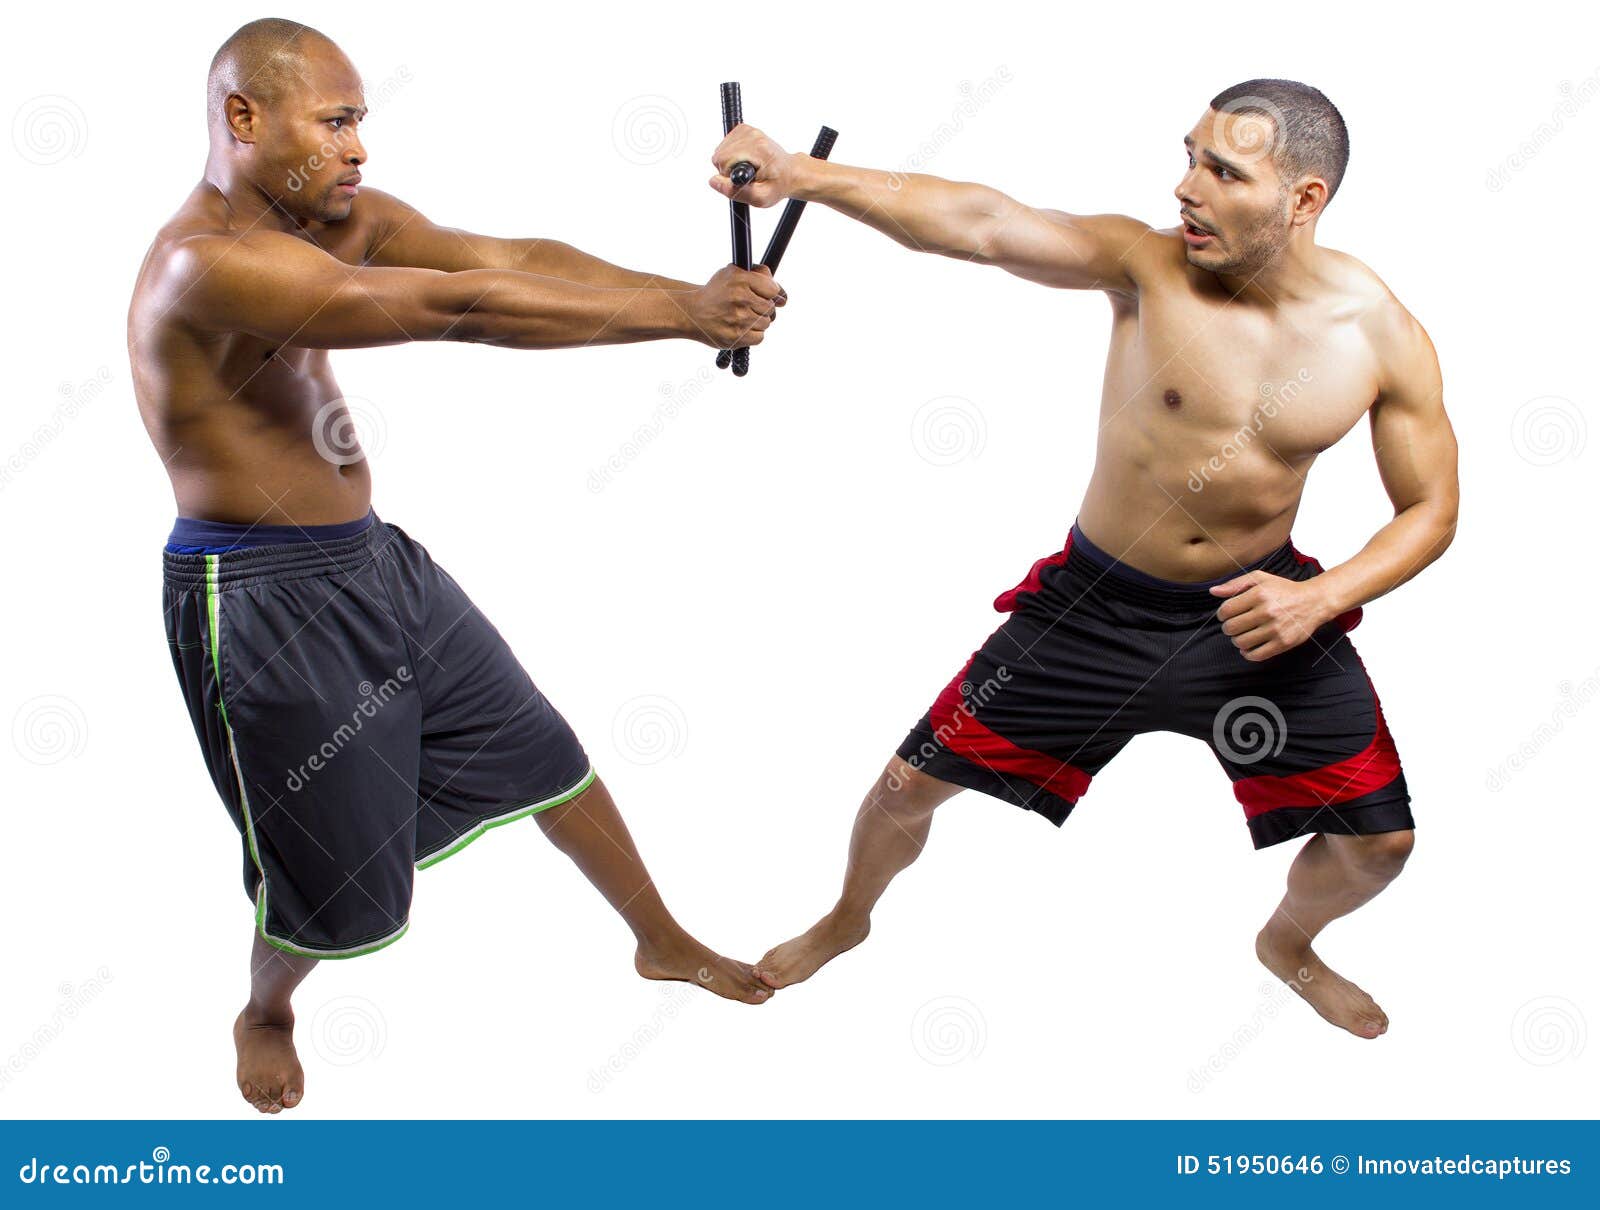 Kali Escrima Fighters Sparring Stock Photo - Image of arnis, bout: 51950608